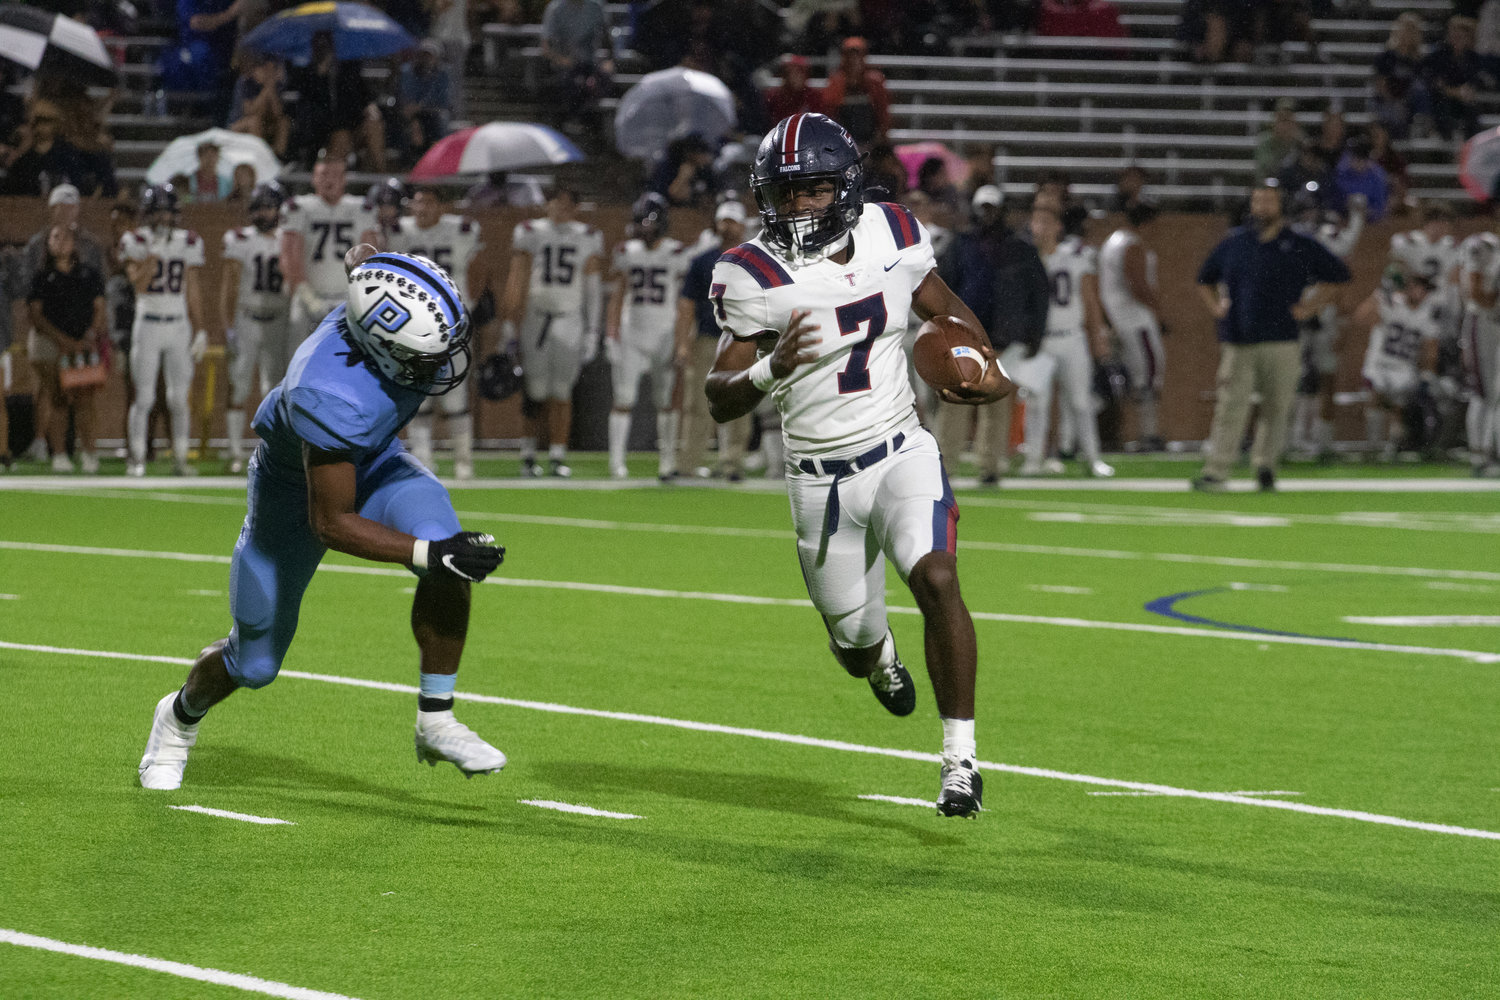 Chris Gilbert Jr. runs past a defender during Friday's game between Tompkins and Paetow at Rhodes Stadium.